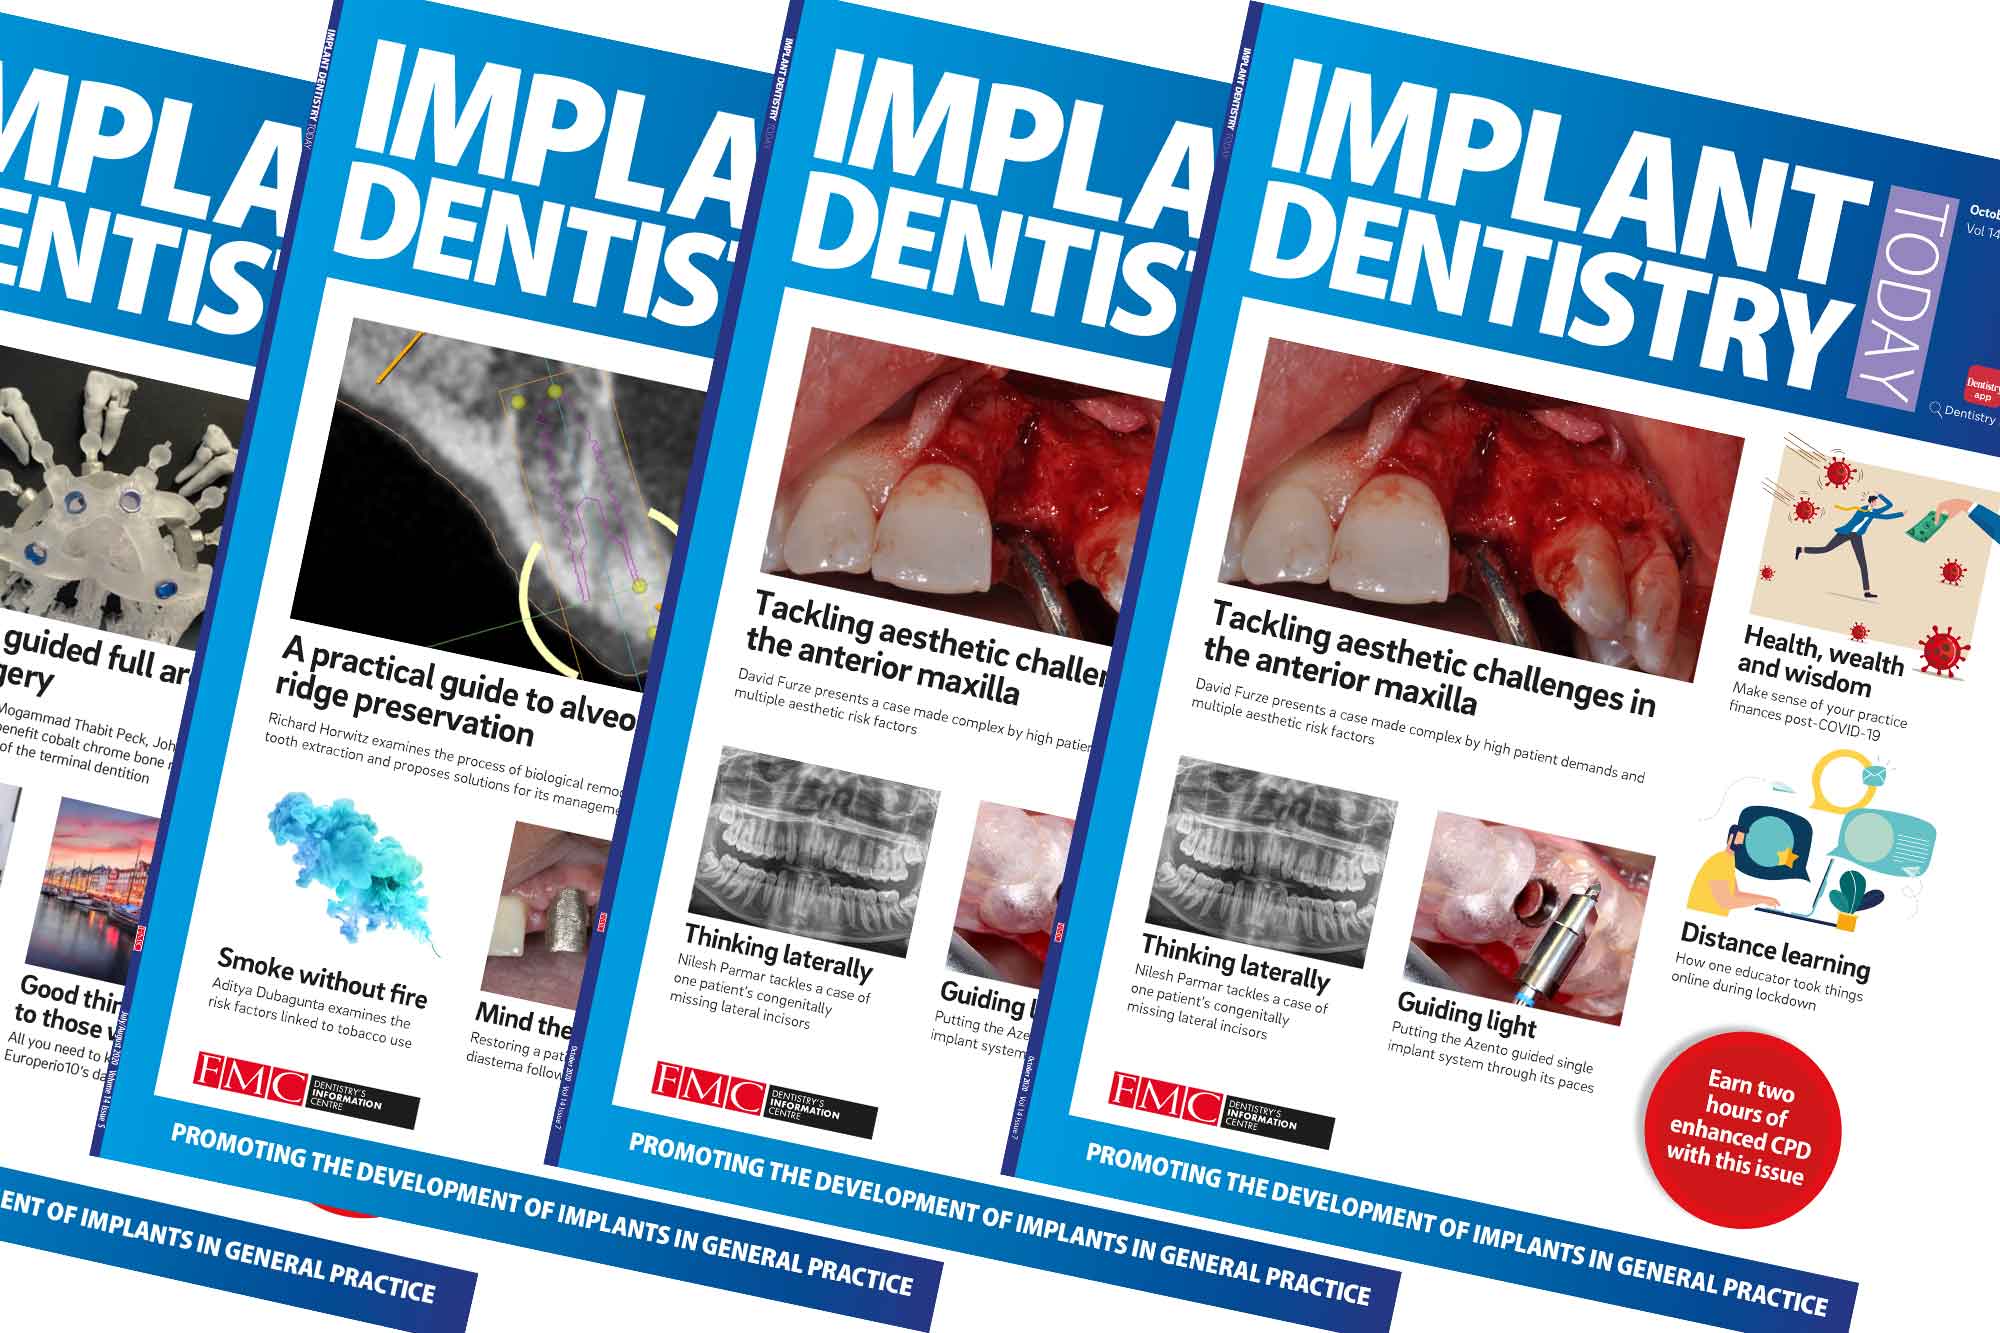 The FMC journal Implant Dentistry Today is joining the digital revolution next month as it adopts a new format for a new year